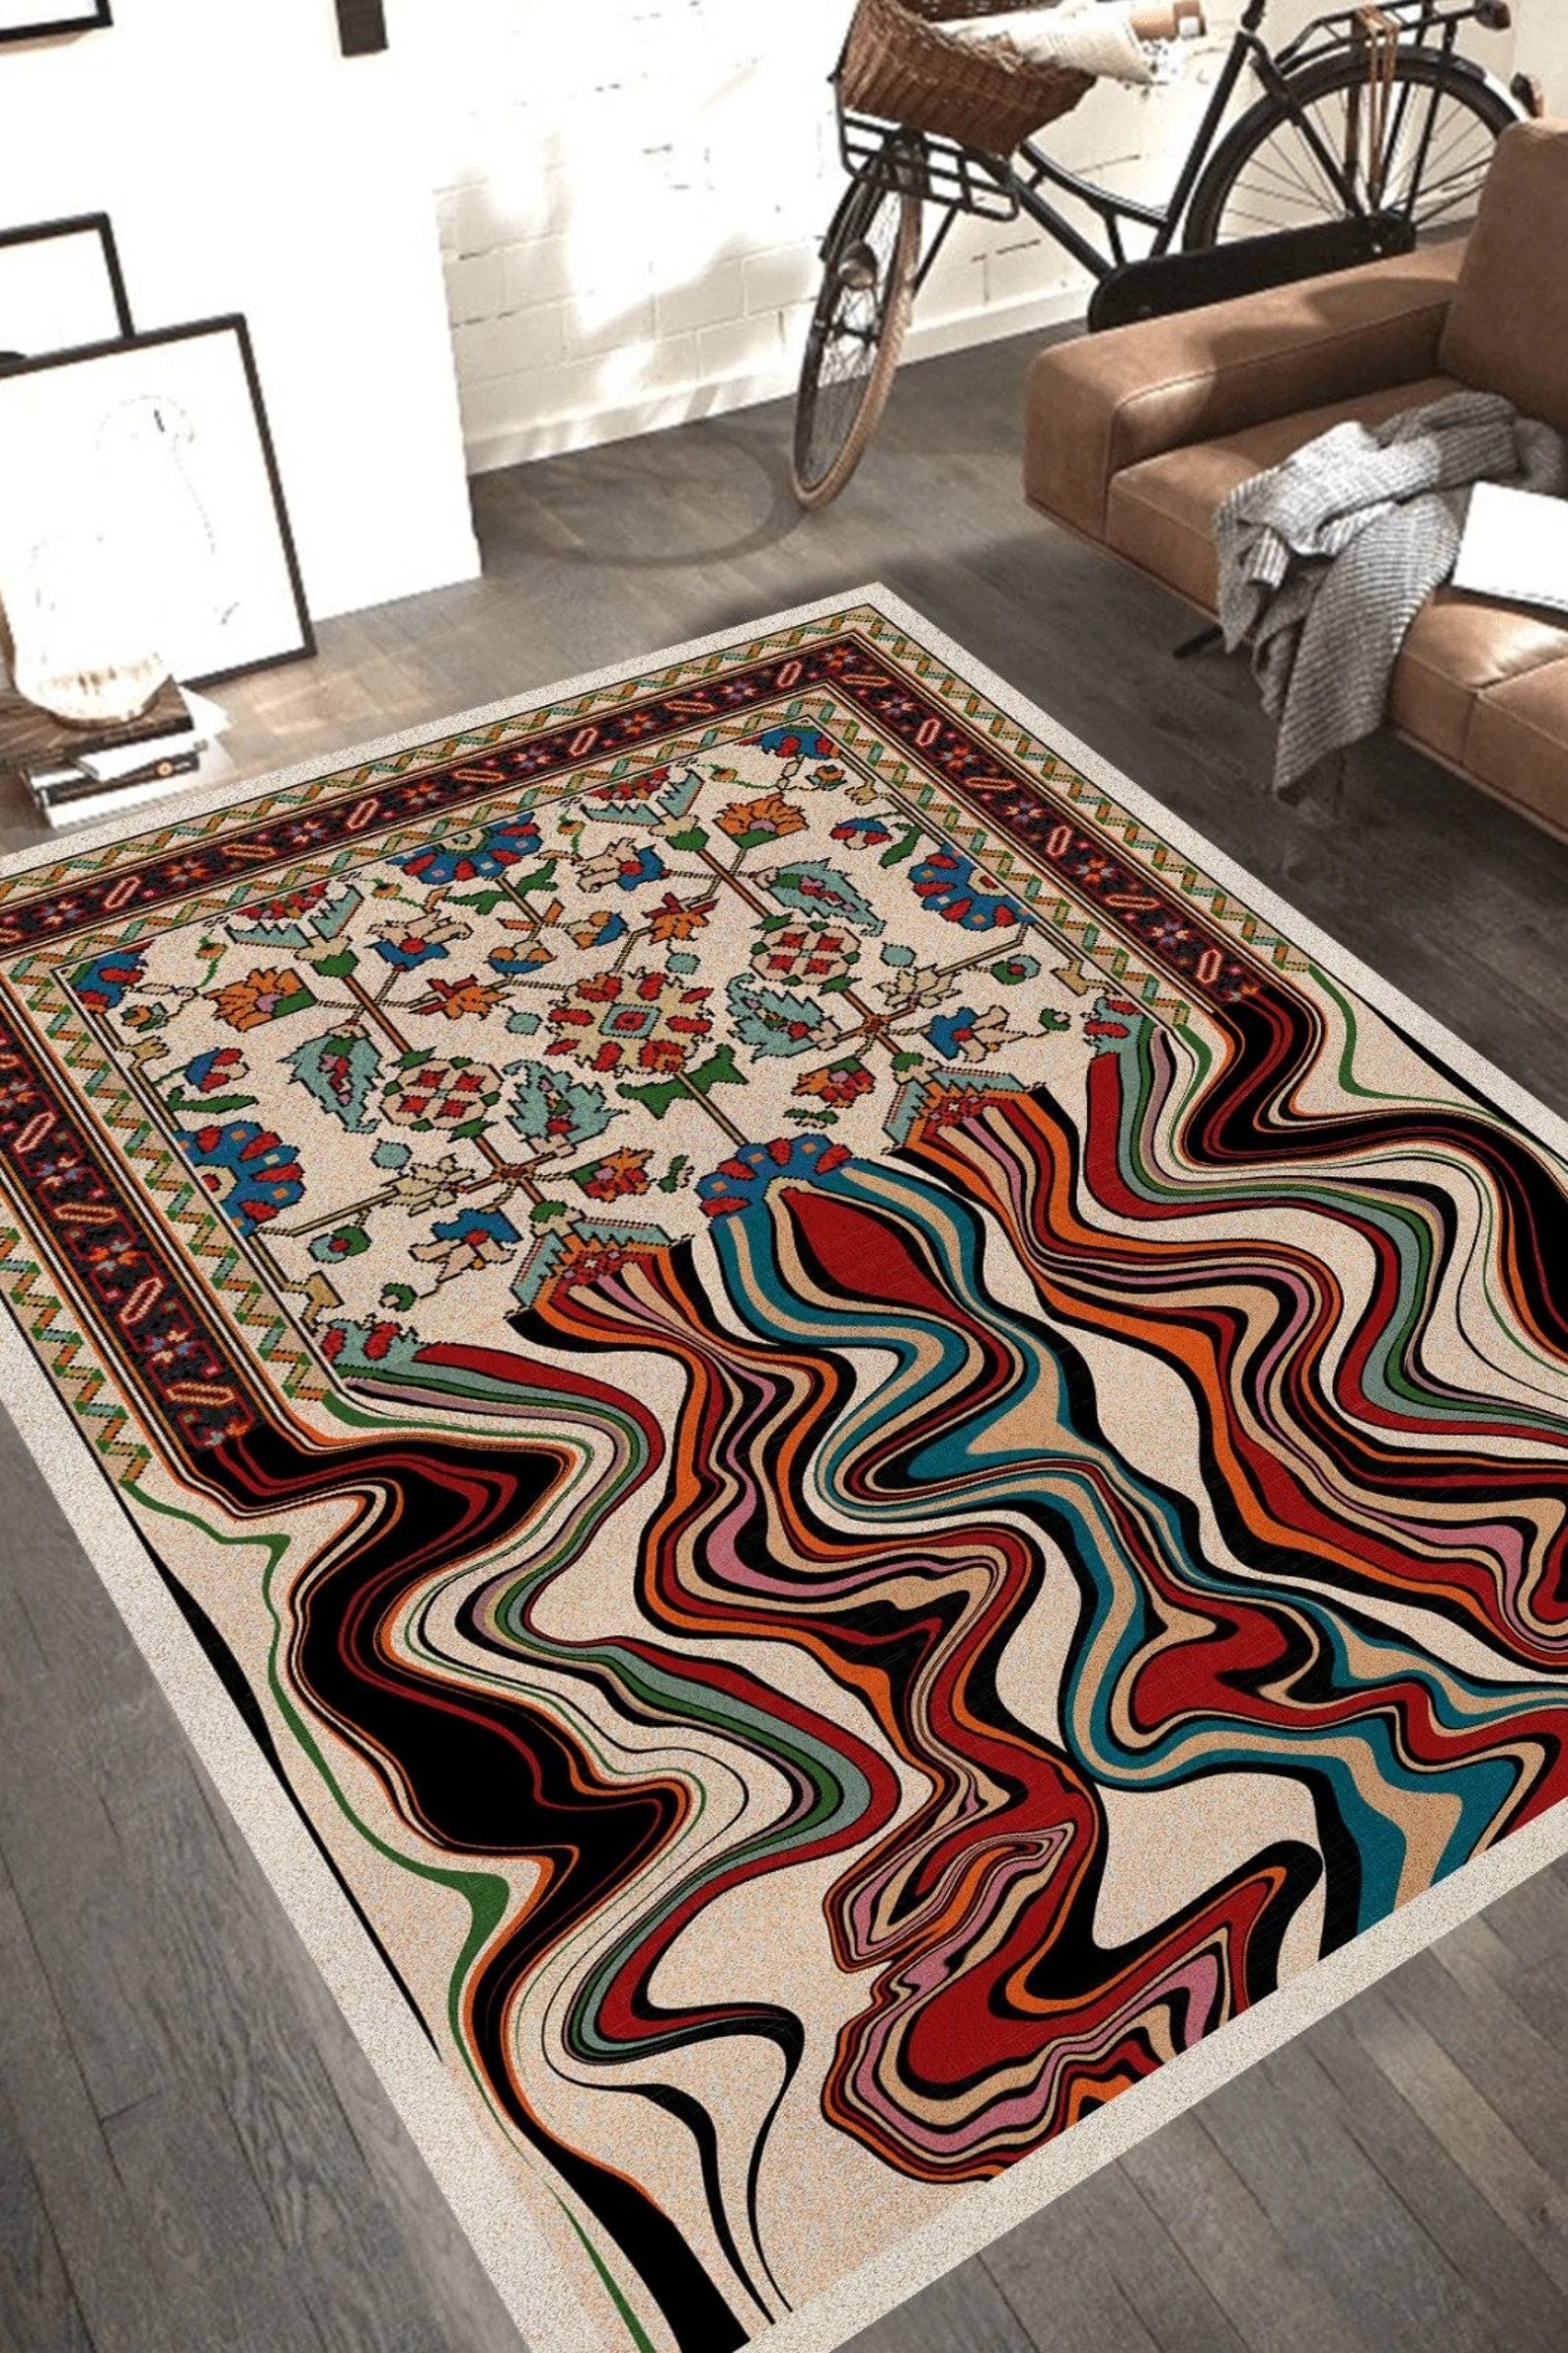 Factors to consider when you display your
kitchen rug